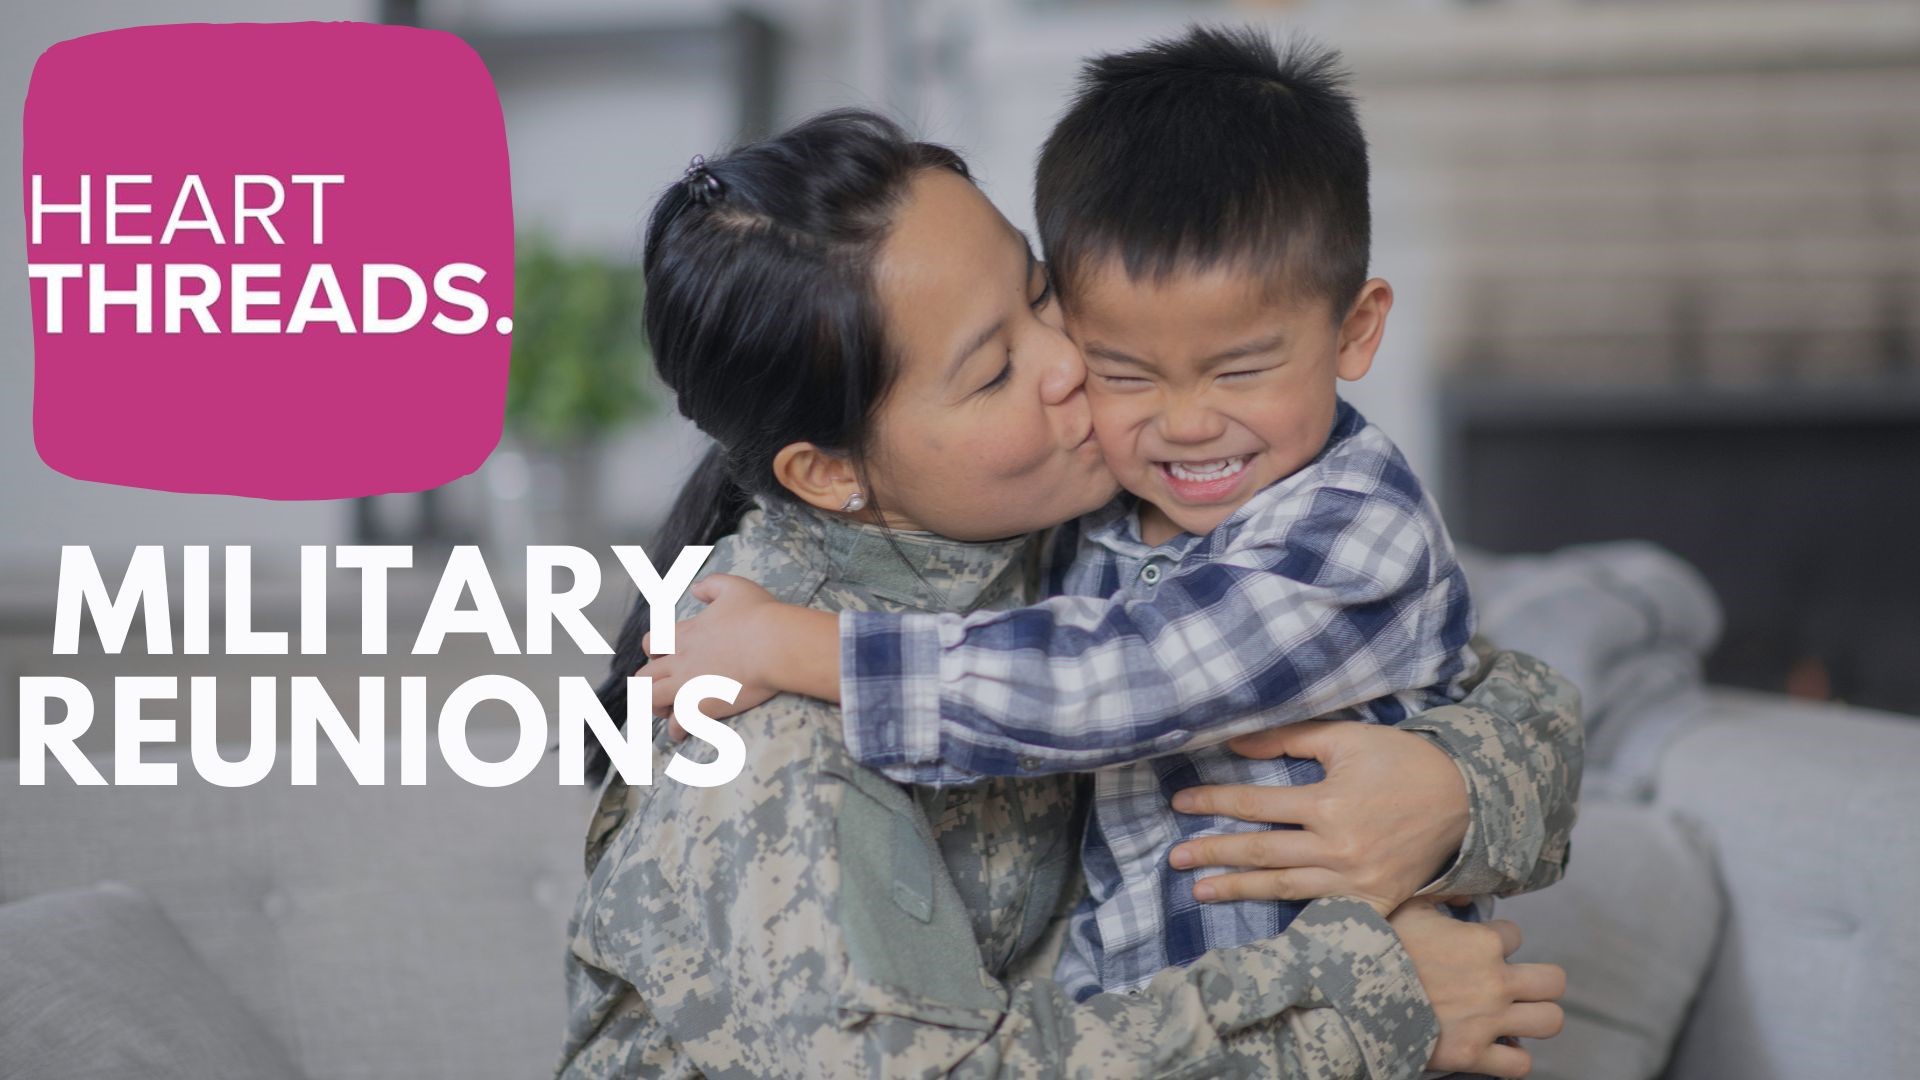 Grab your tissues, as we see families reunite after months or years apart. The military surprises and reunions that will warm your heart.